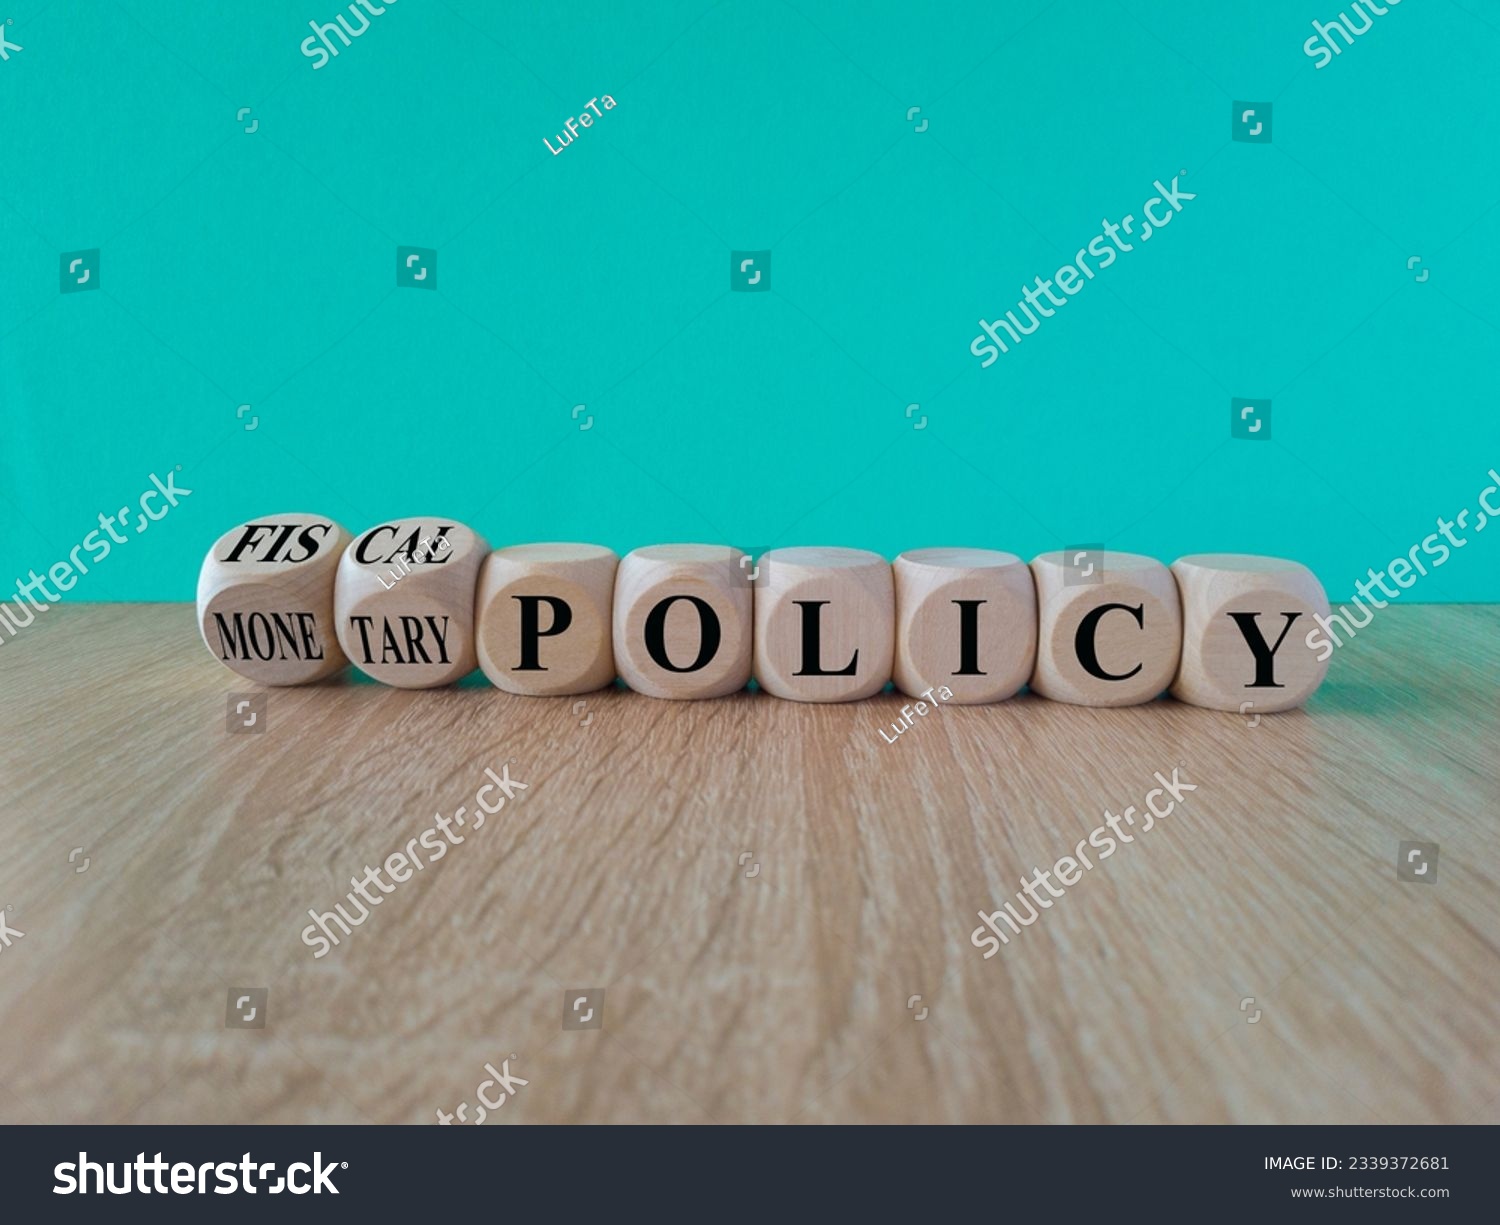 Fiscal or monetary policy symbol. Turned cubes and changes words fiscal policy to monetary policy. Beautiful blue background. Business and fiscal or monetary policy concept. Copy space. #2339372681